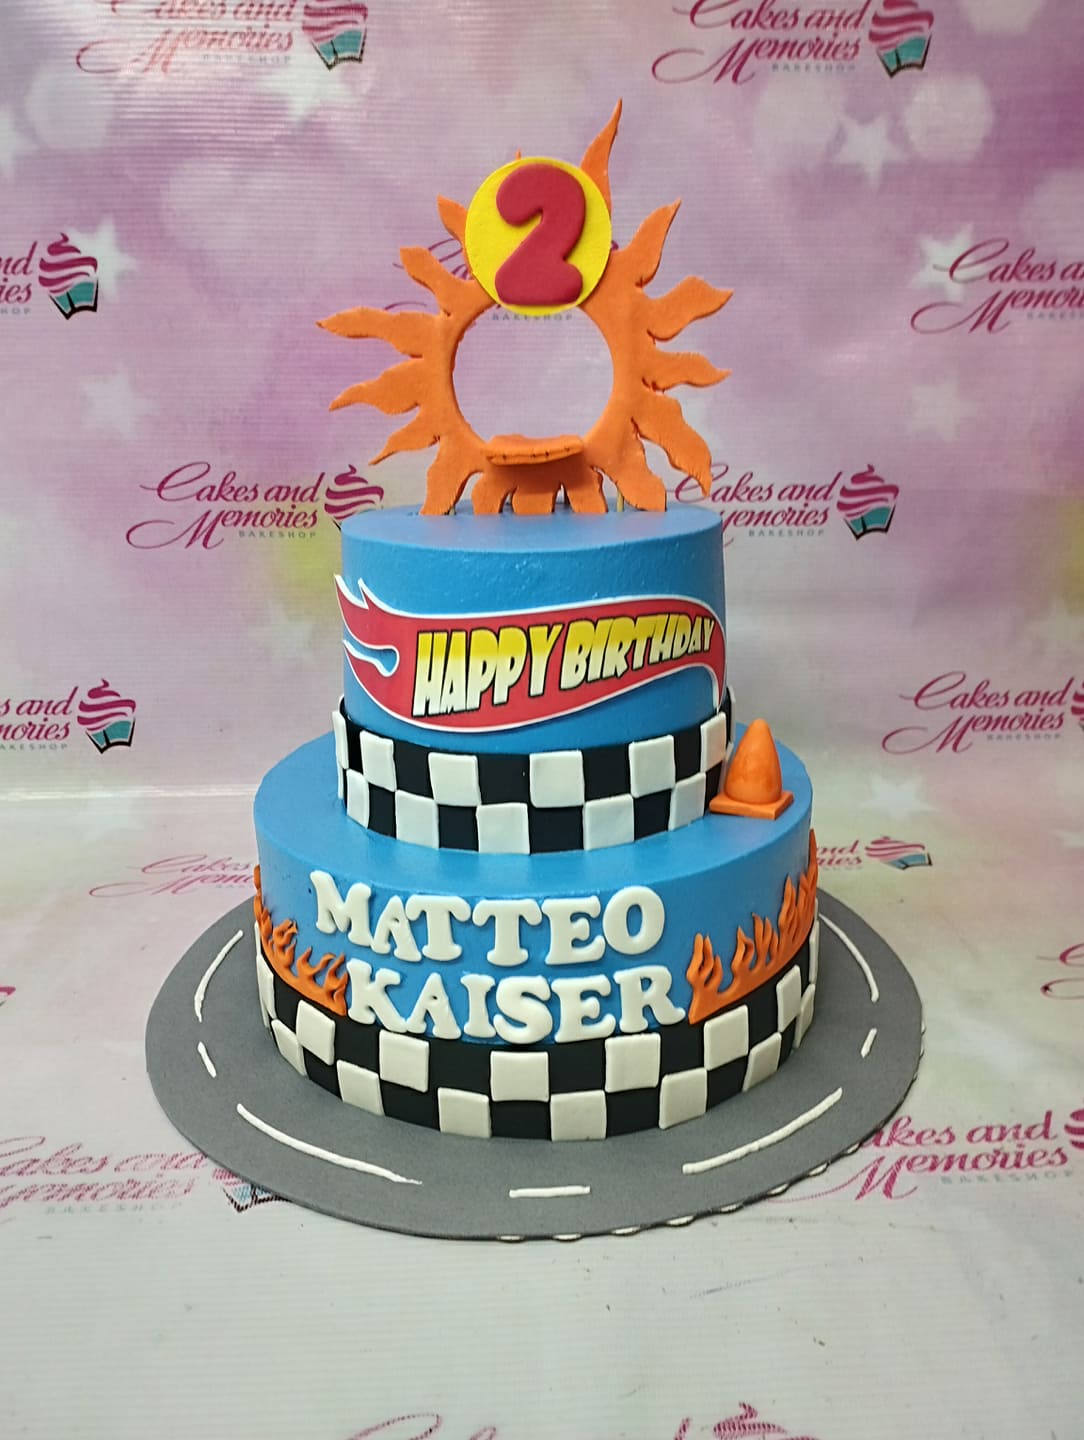 Share more than 76 simple hot wheels cake - awesomeenglish.edu.vn